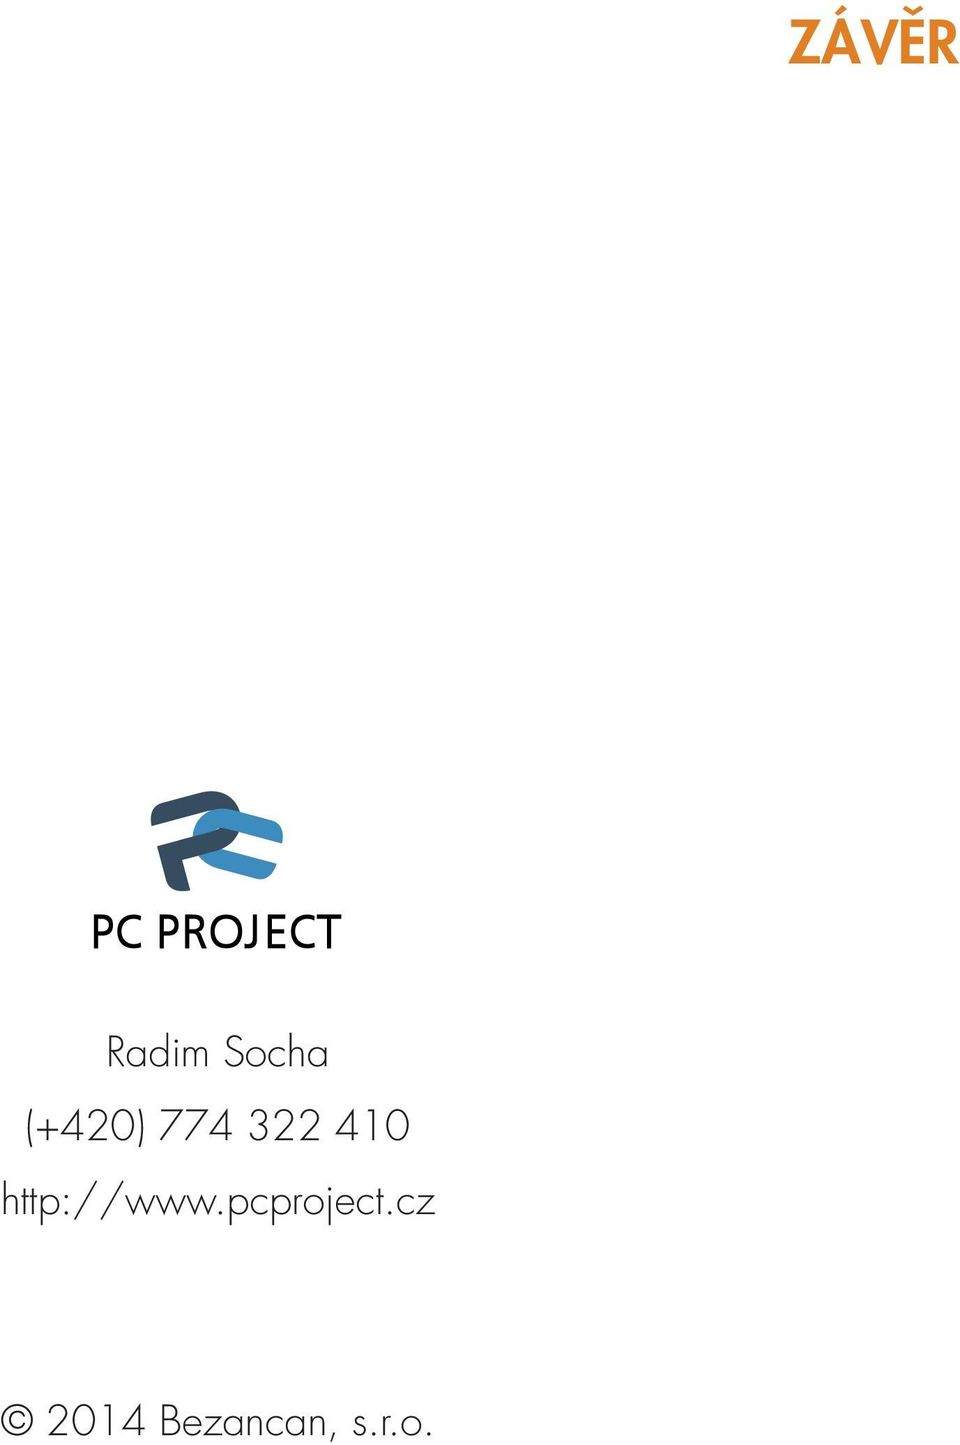 http://www.pcproject.